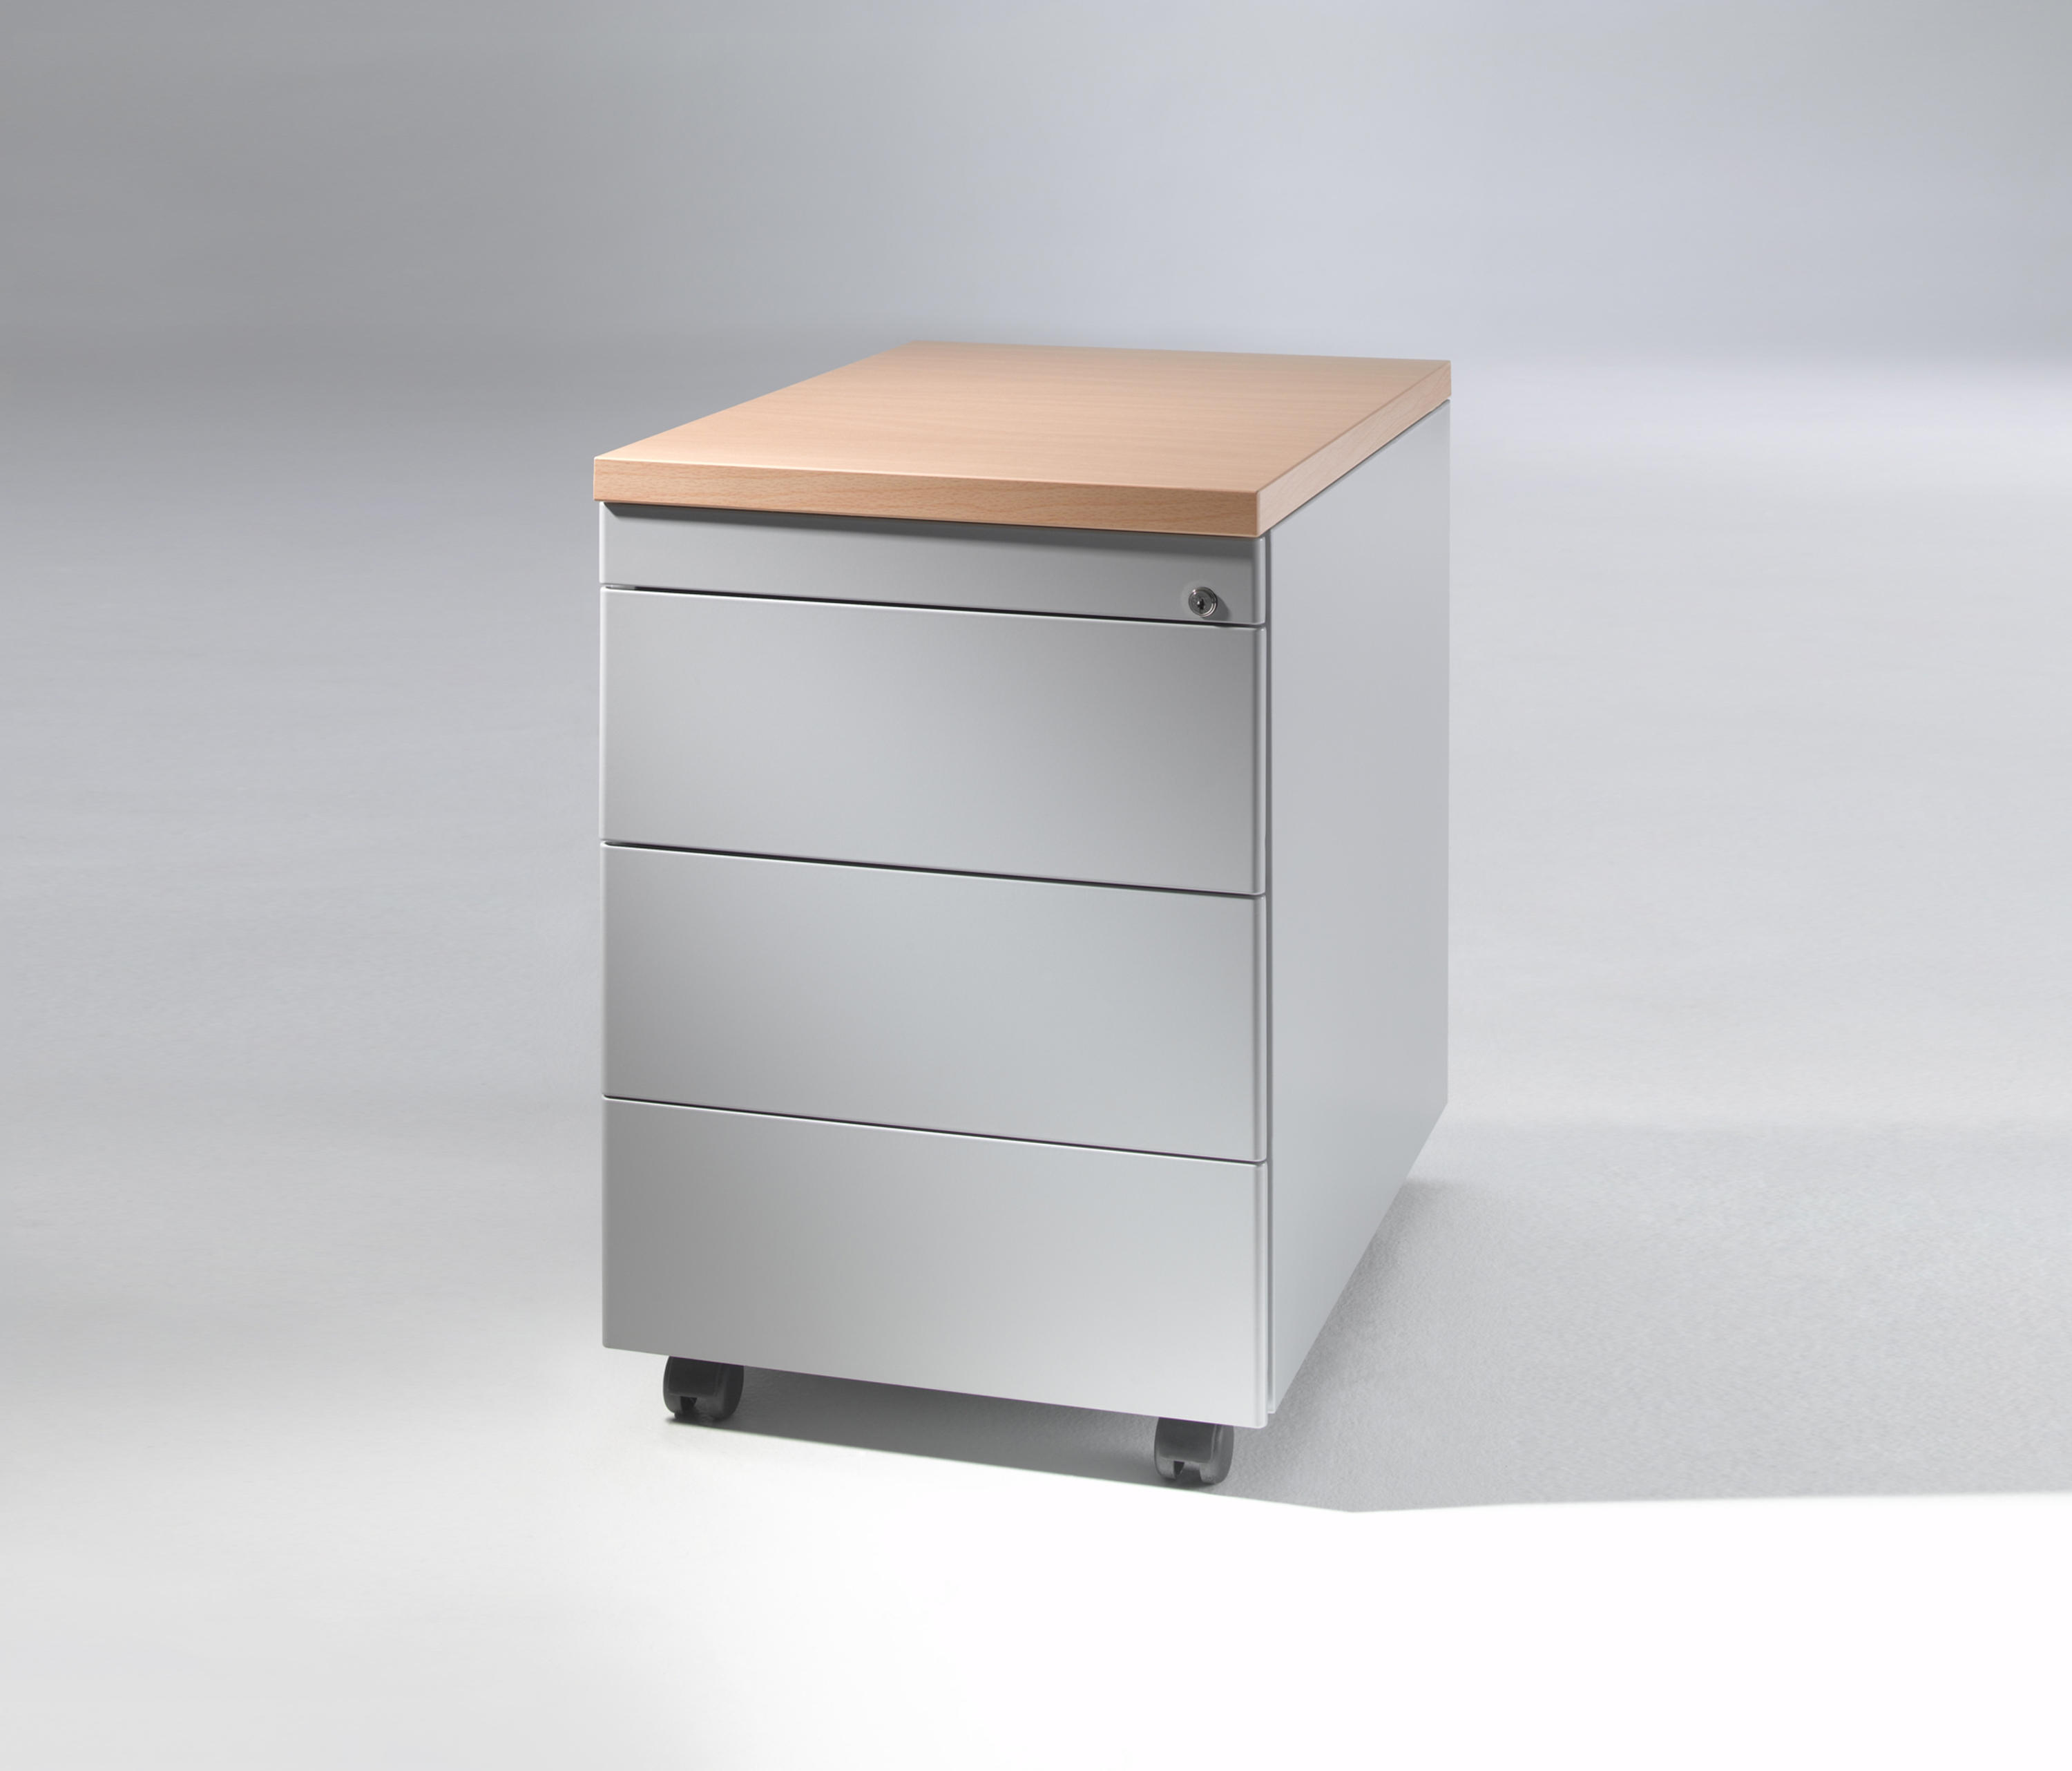 Haworth File Drawer Insert, Products